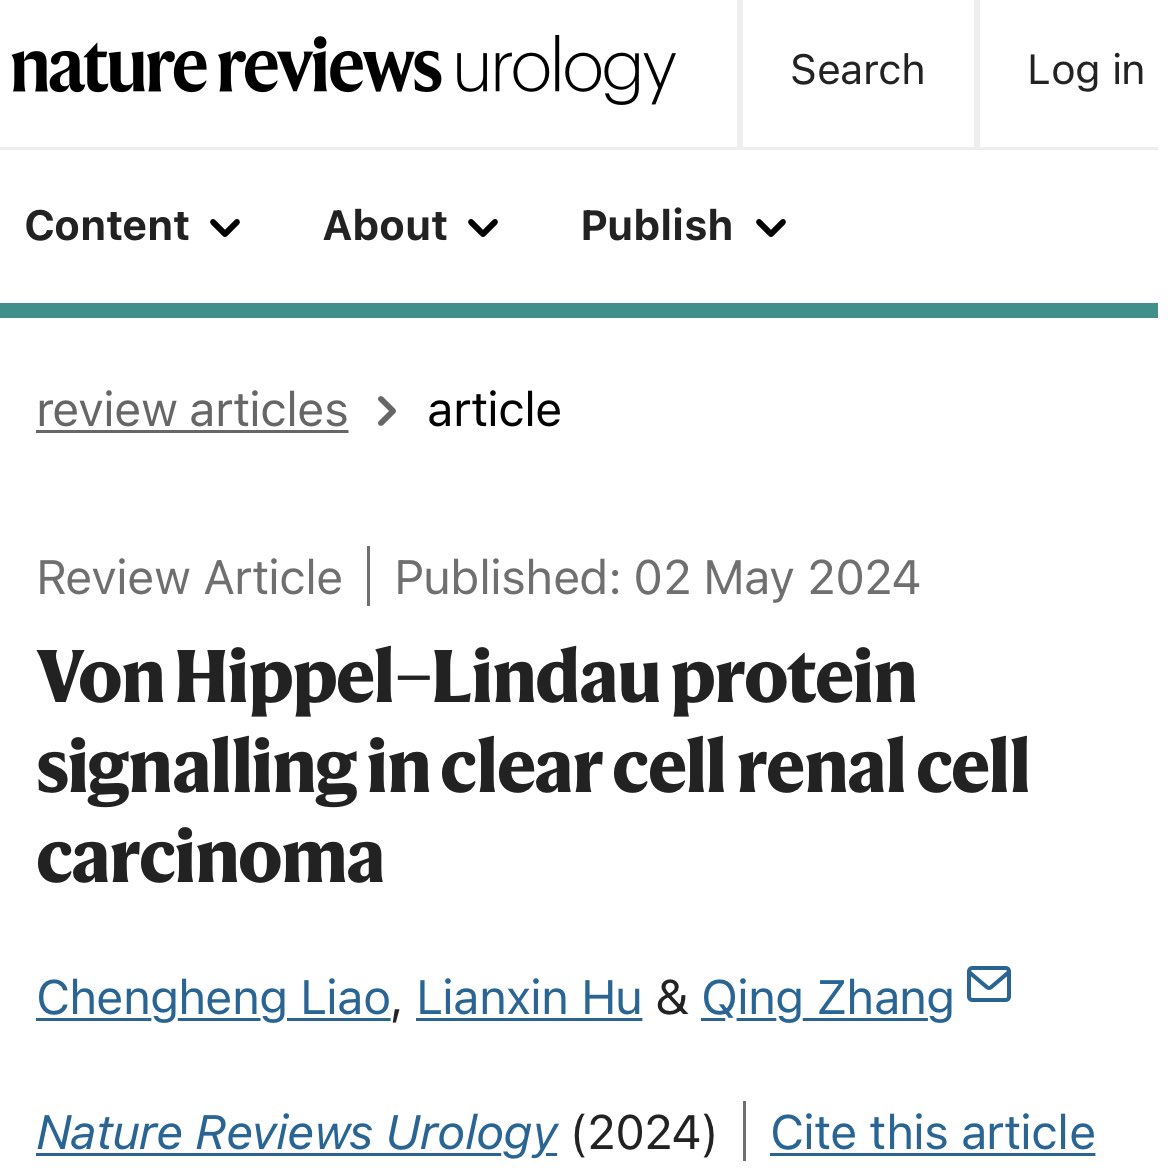 🧬🧬🧬A must-read comprehensive review on the role of VHL protein signaling in patients with clear cell renal cell carcinoma📖⬇️⬇️⬇️ doi.org/10.1038/s41585… @OncoAlert @NatureMedicine @Nature @ChenghengLiao